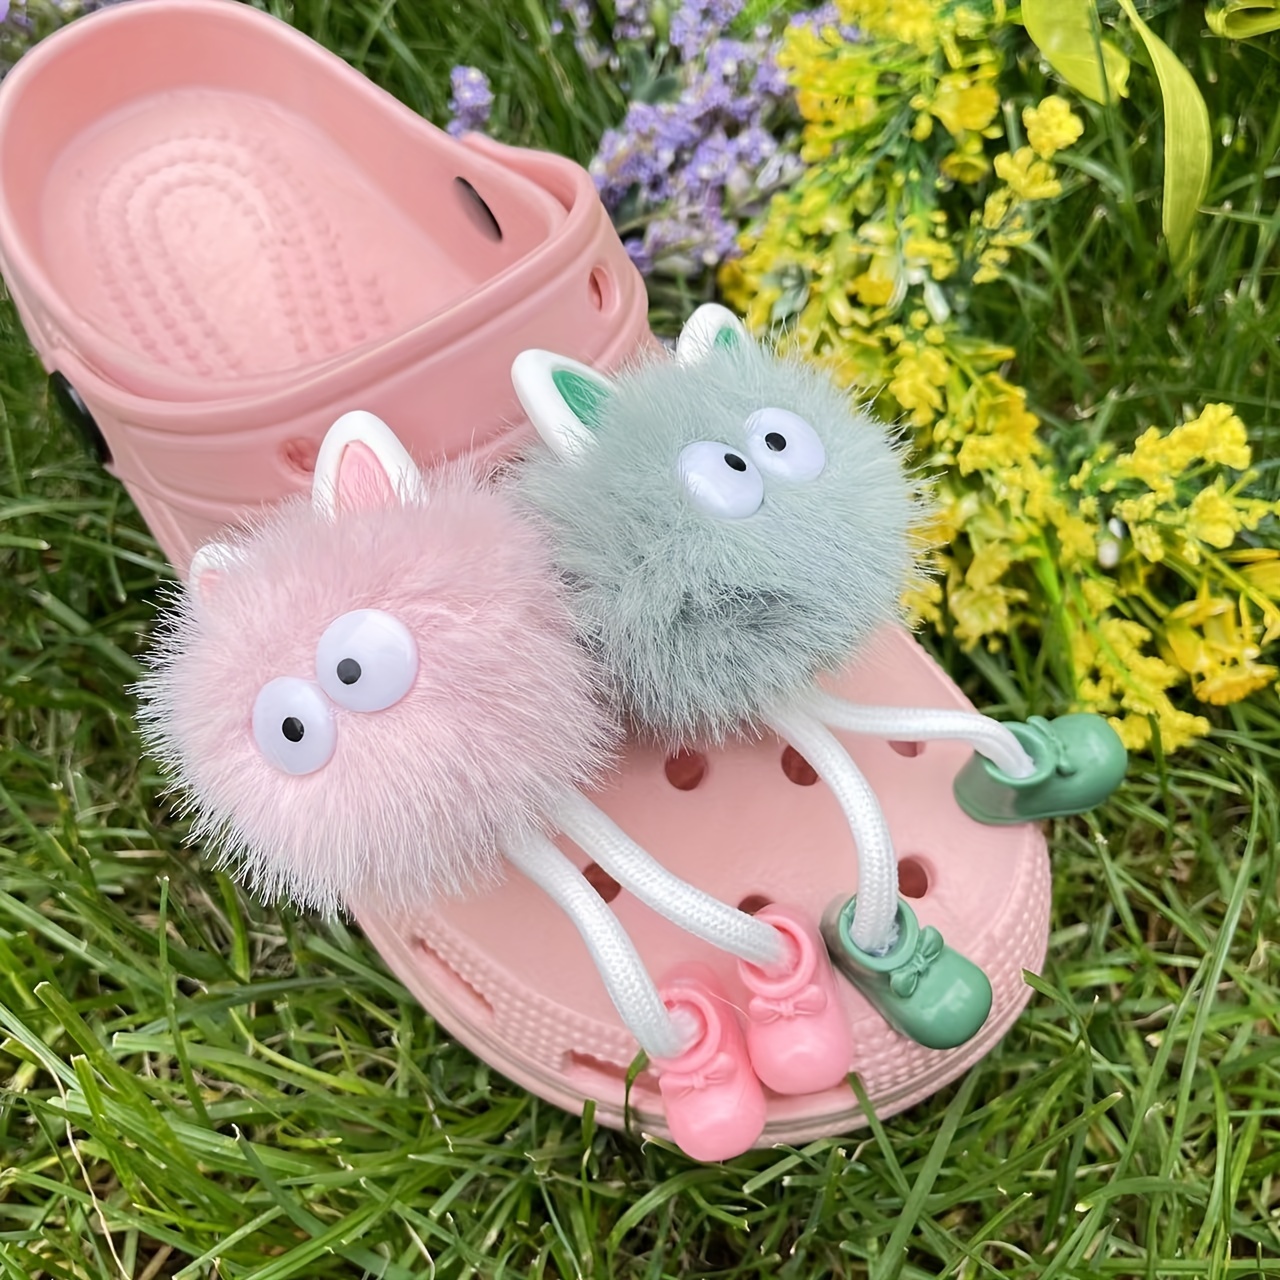 10pcs/set Shoe Charms Decoration For Croc Kawaii Jibitz For Girls And Women  Party Birthday Gift Clog Sandal Shoe Accessories